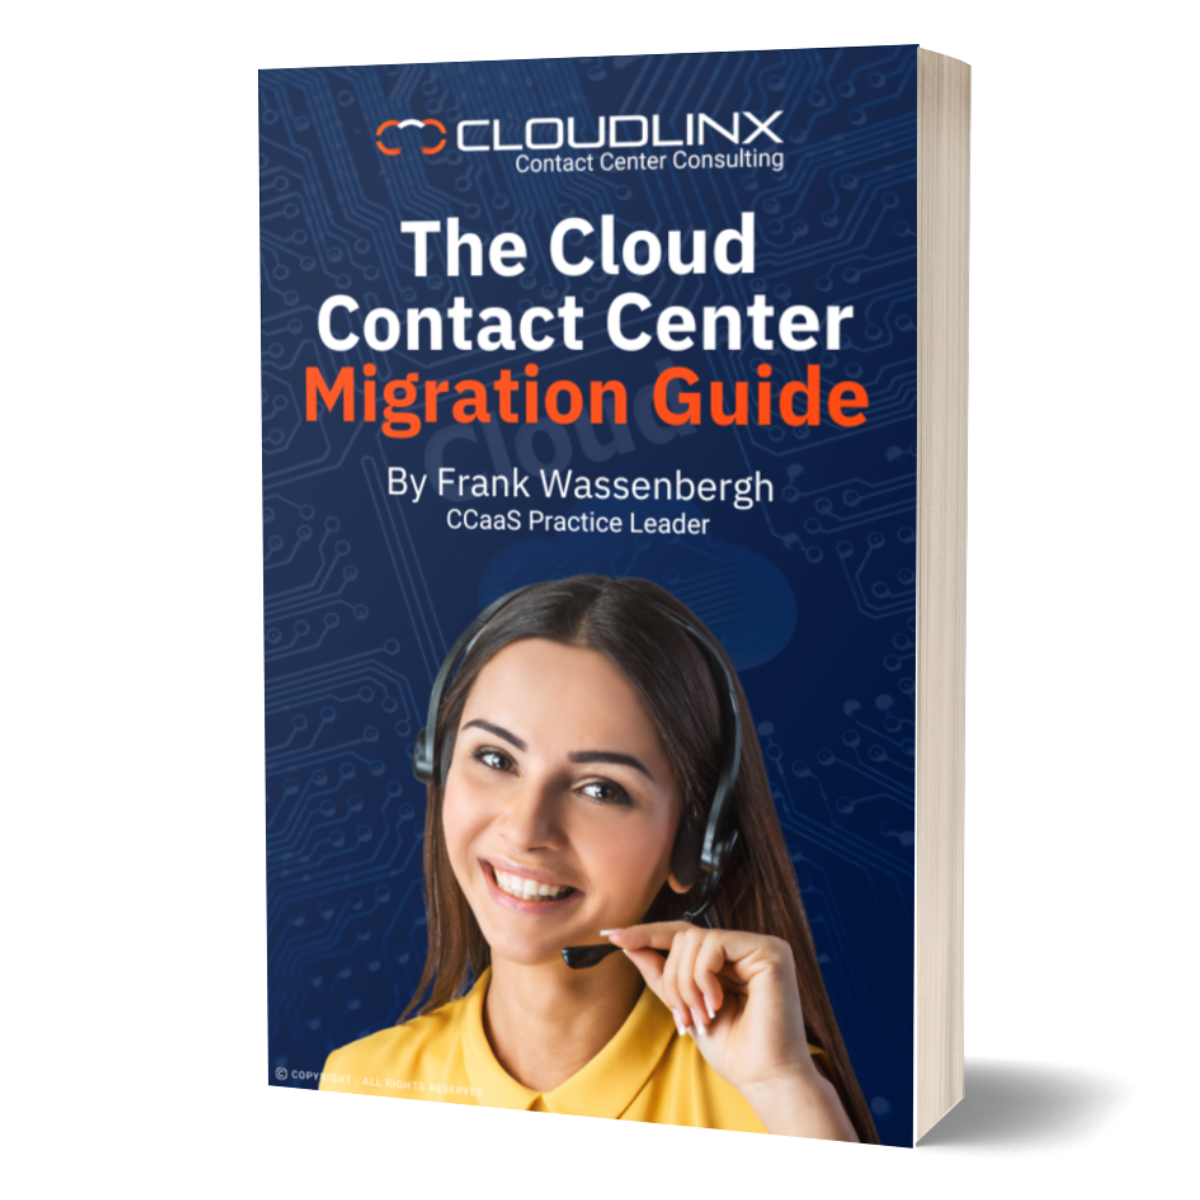 The Cloud Contact Center Migration Guide